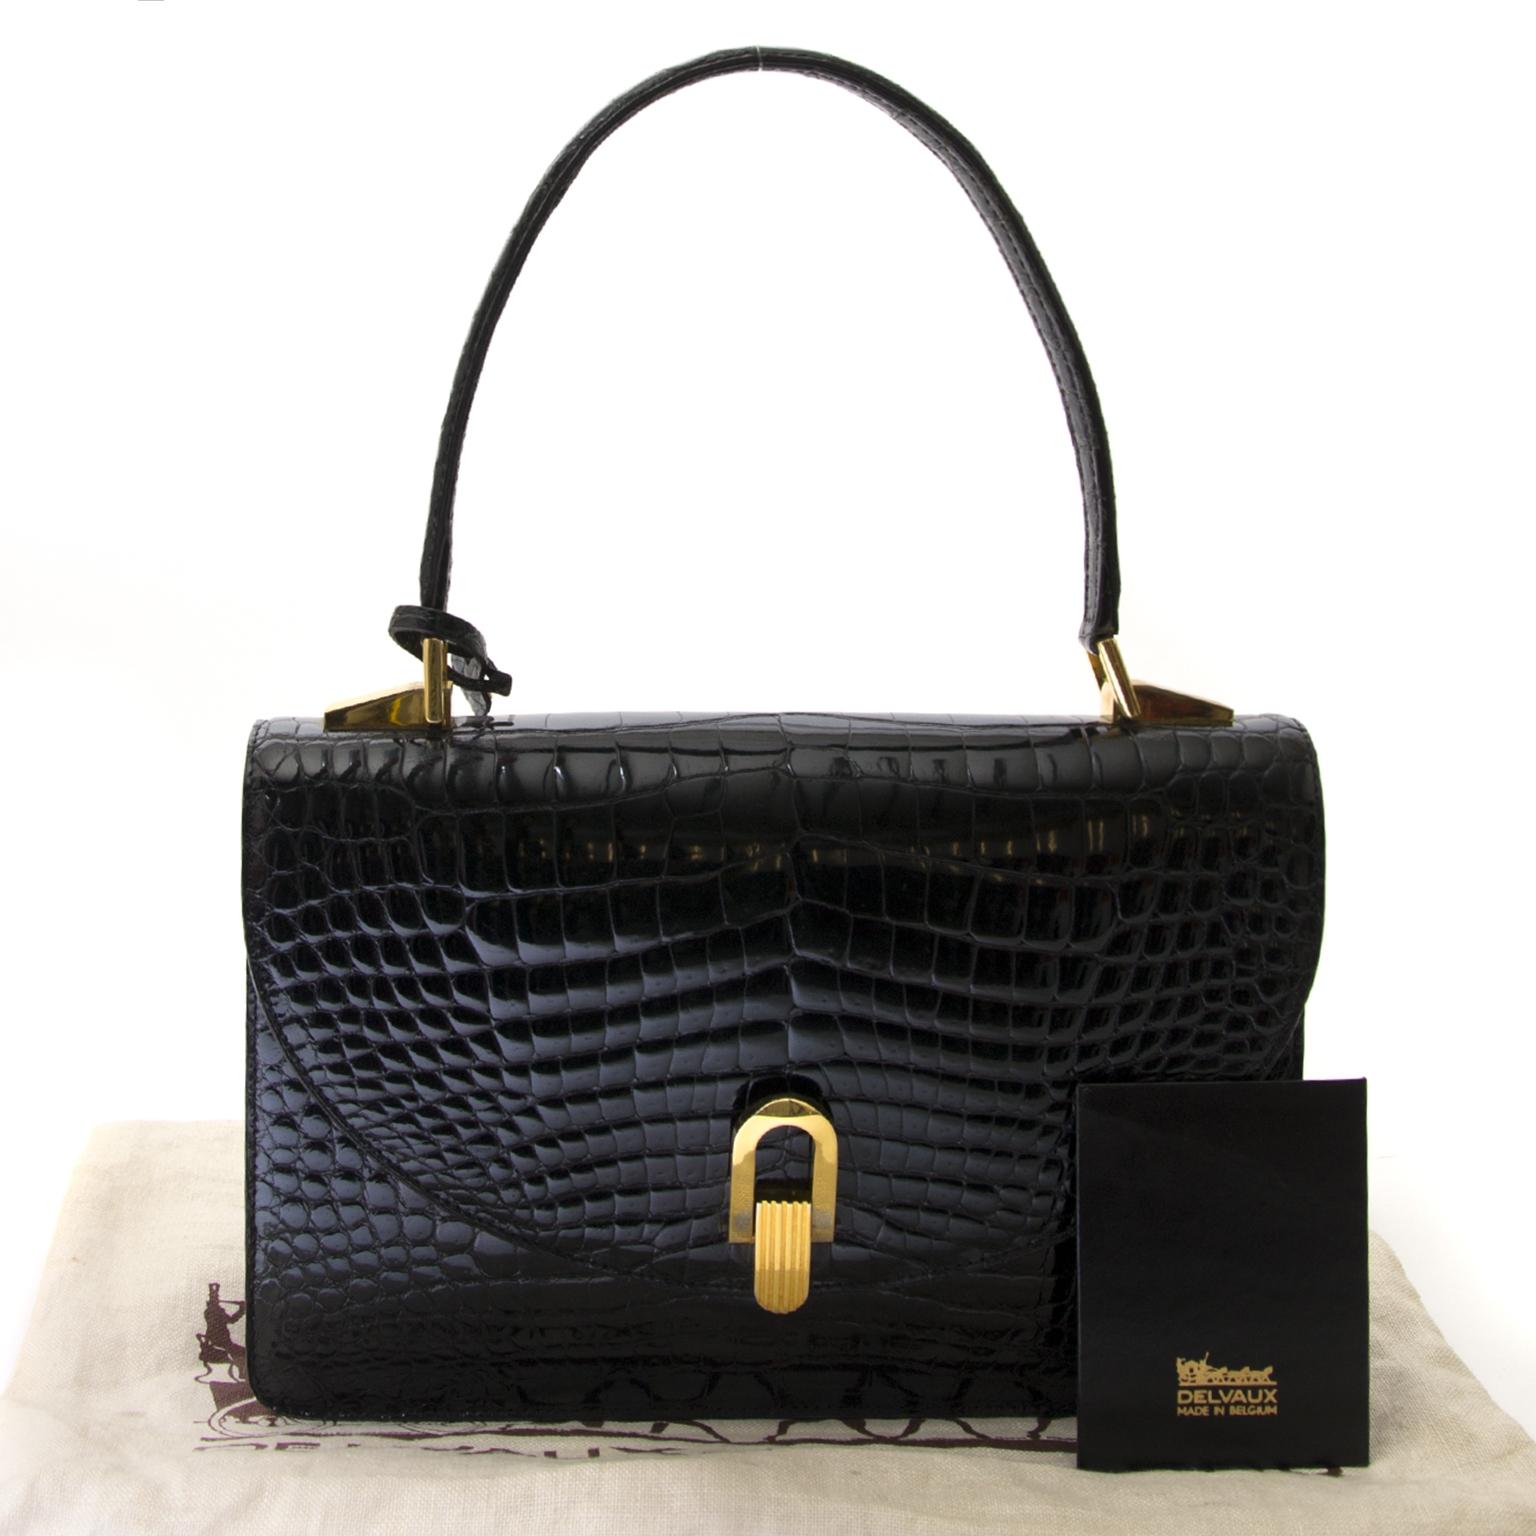 Good preloved condition

Delvaux Black Croco Handbag

This gorgeous handbag by Delvaux is a truely unique designer piece.
The bag is crafted in black croco leather and features gold-tone hardware.
It opens with a flap and a push button, that gives